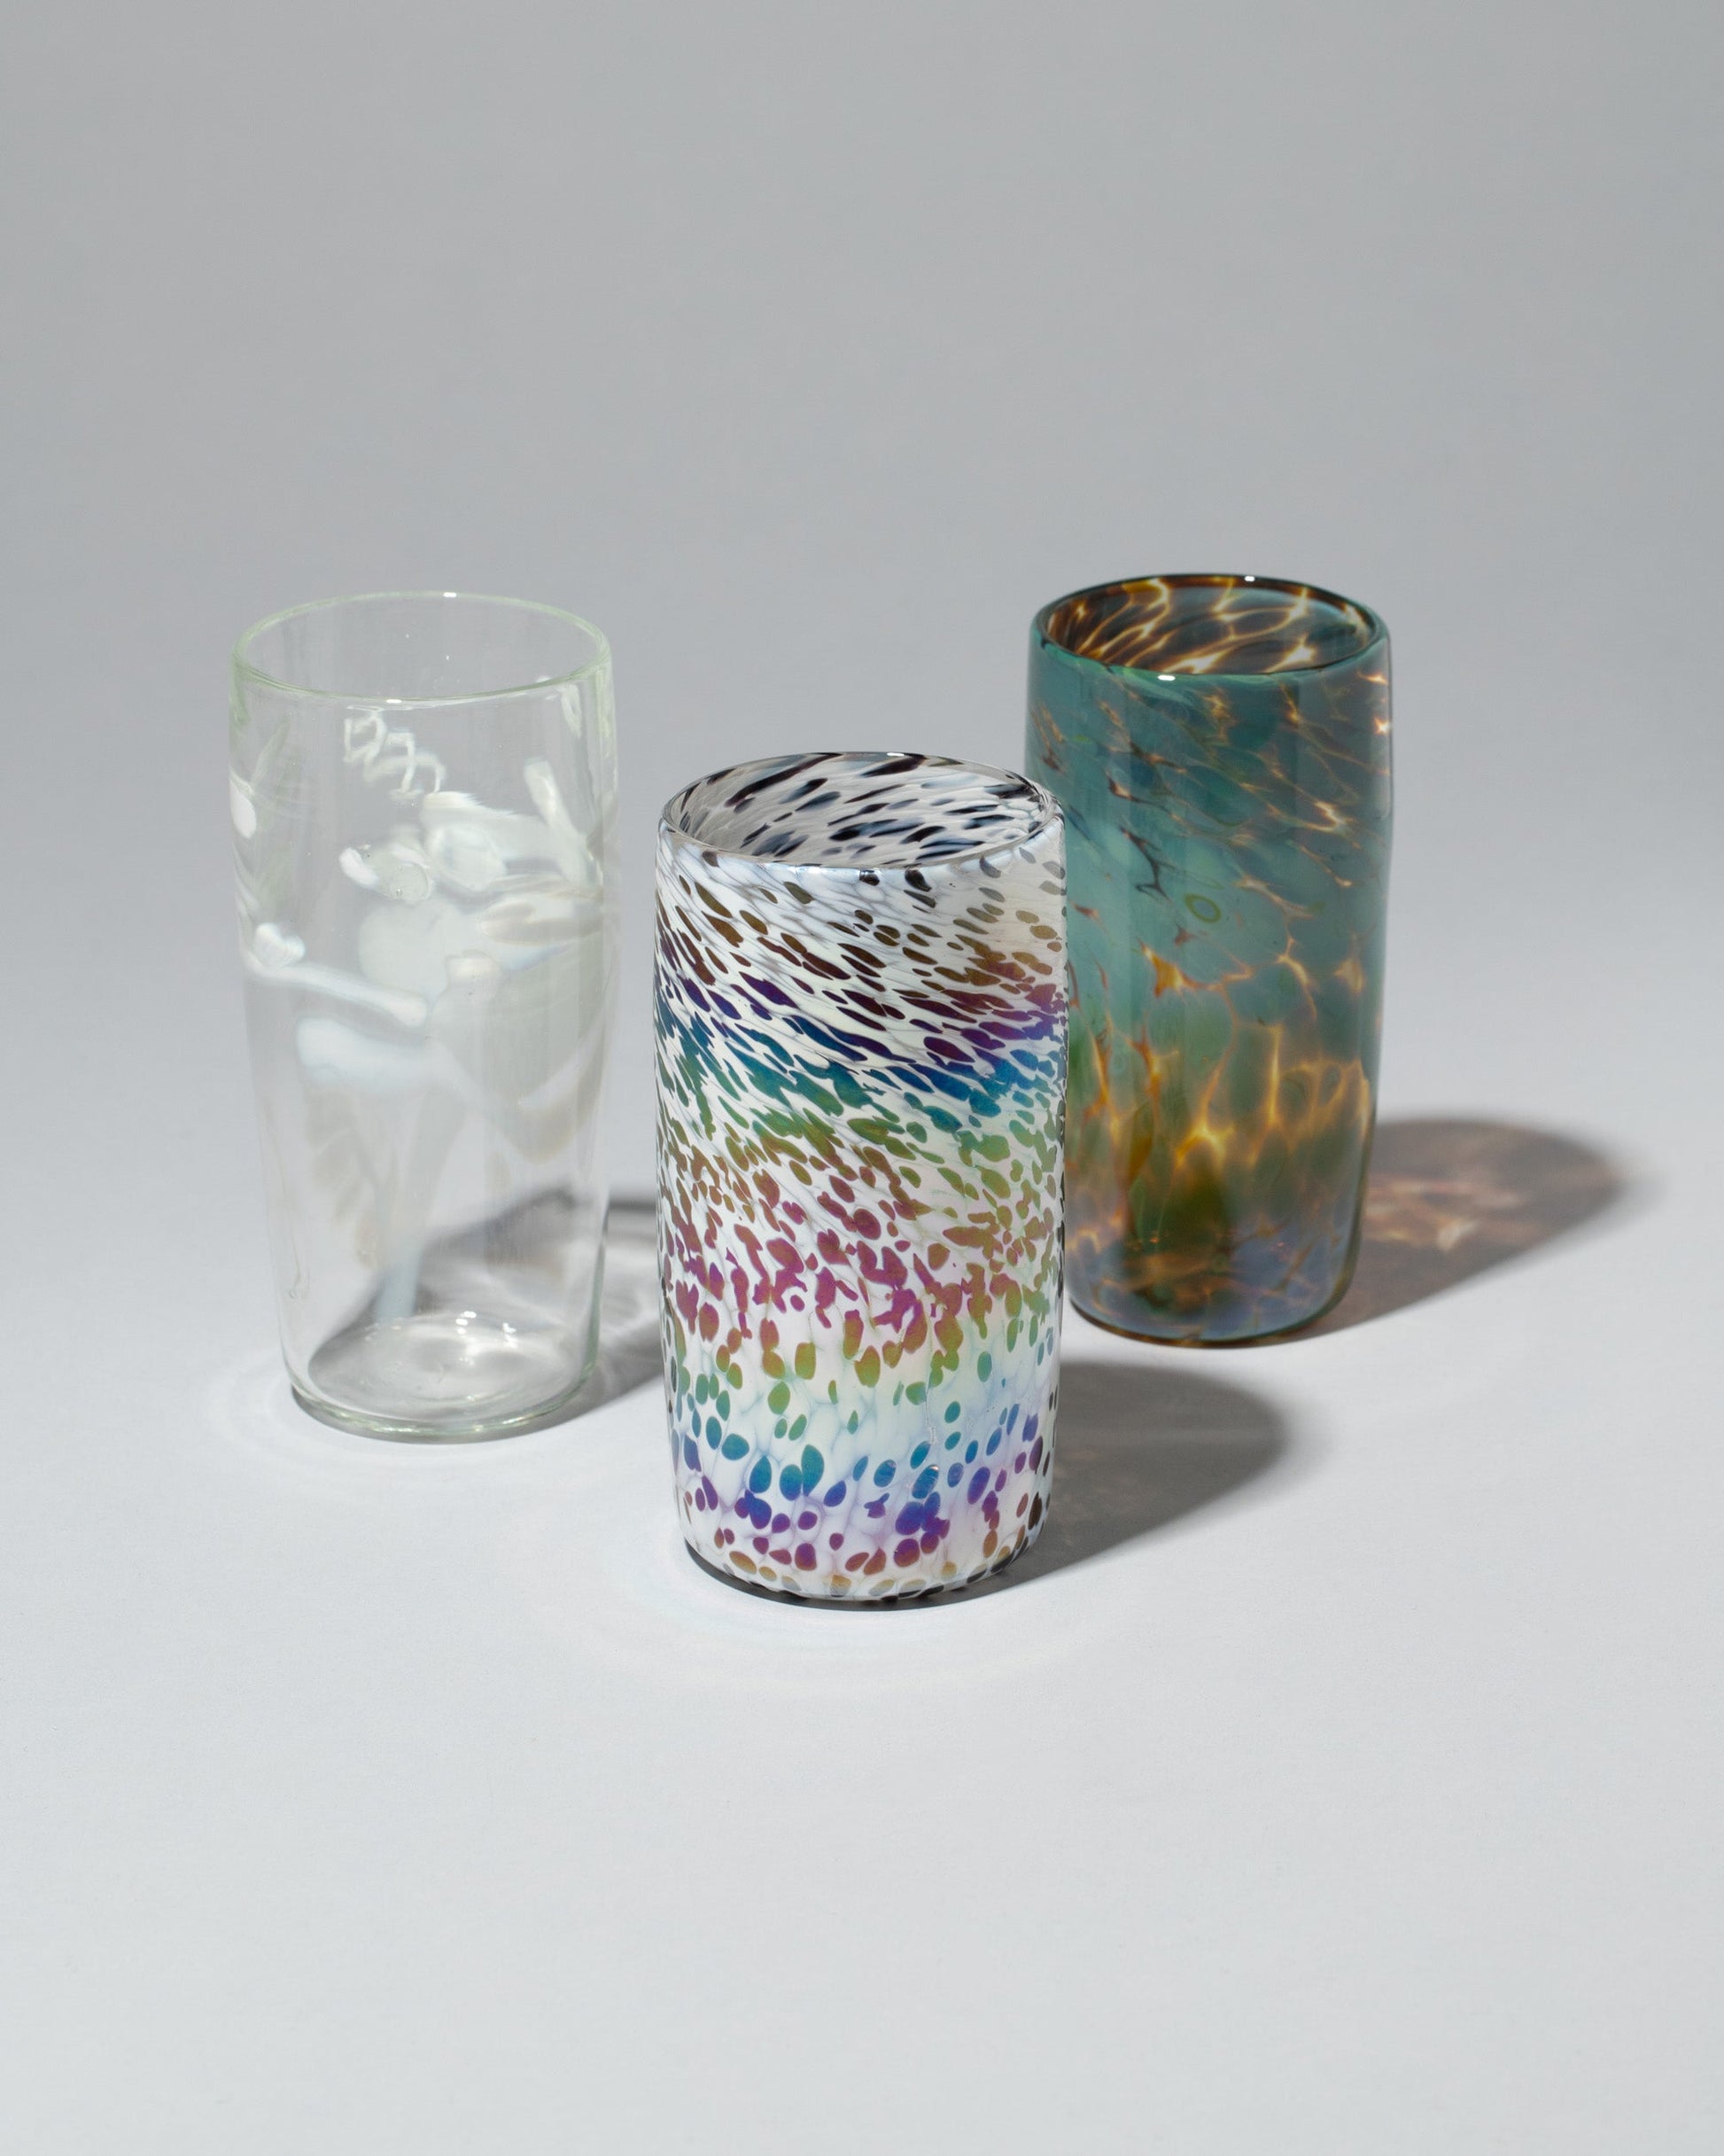 Group of Sirius Glassworks White Nassau Tumblers on light color background.